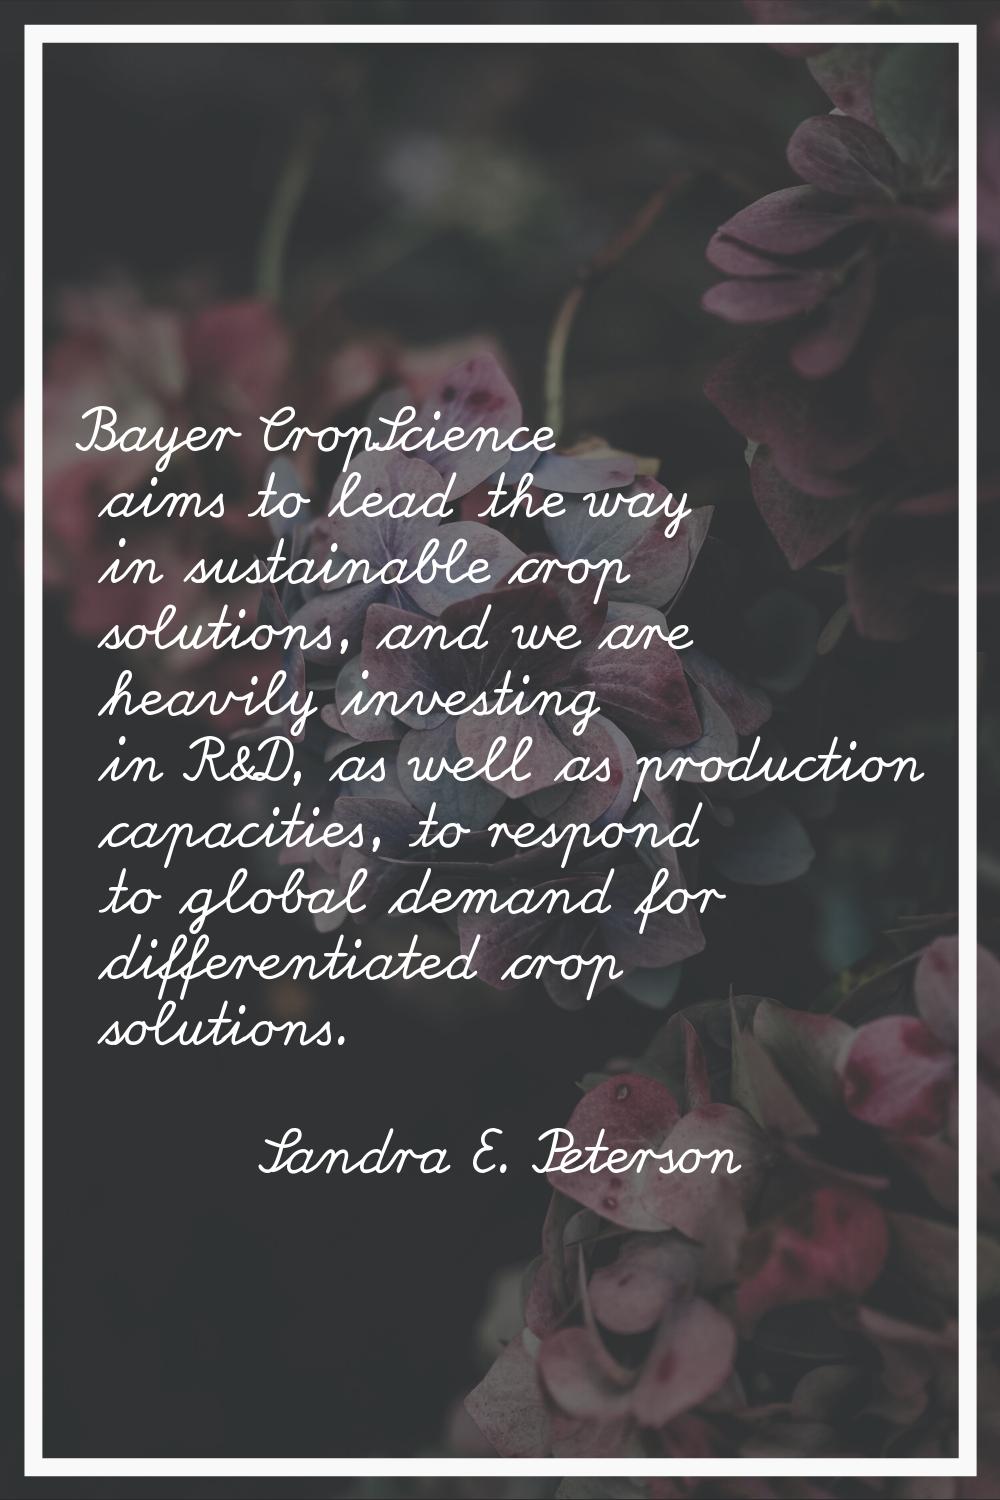 Bayer CropScience aims to lead the way in sustainable crop solutions, and we are heavily investing 